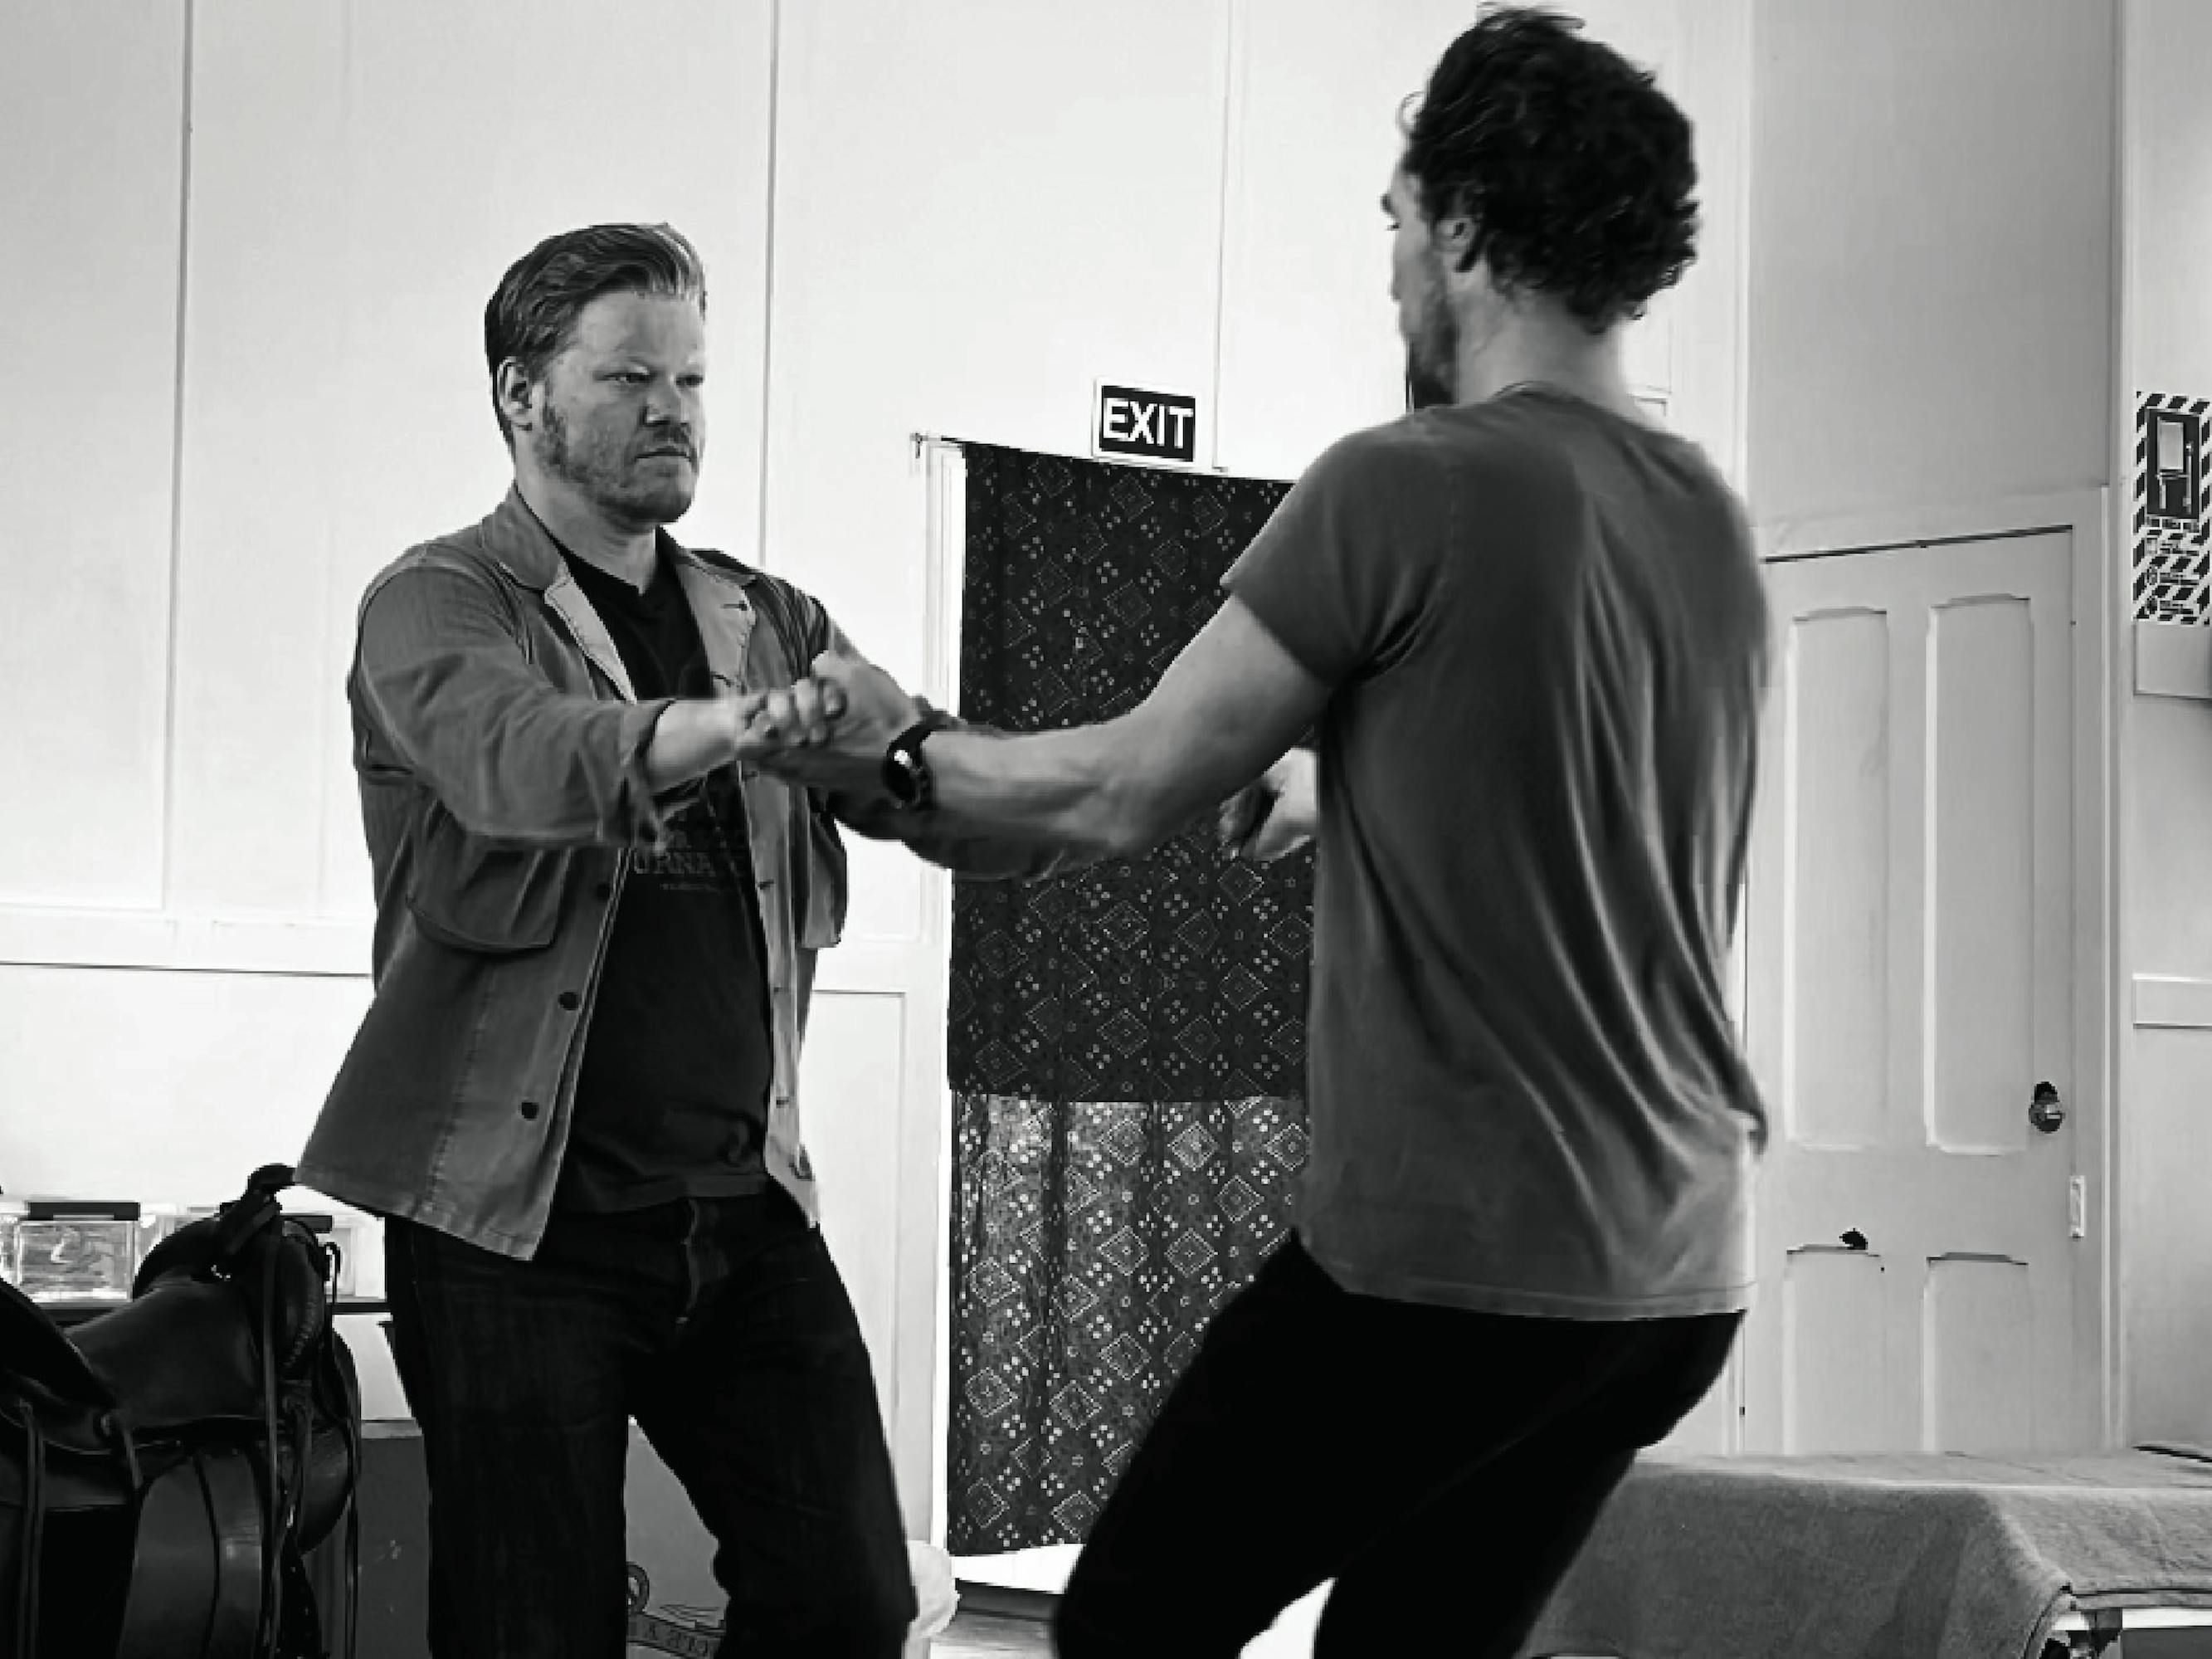 Jesse Plemons and Benedict Cumberbatch dance together in this black-and-white shot.